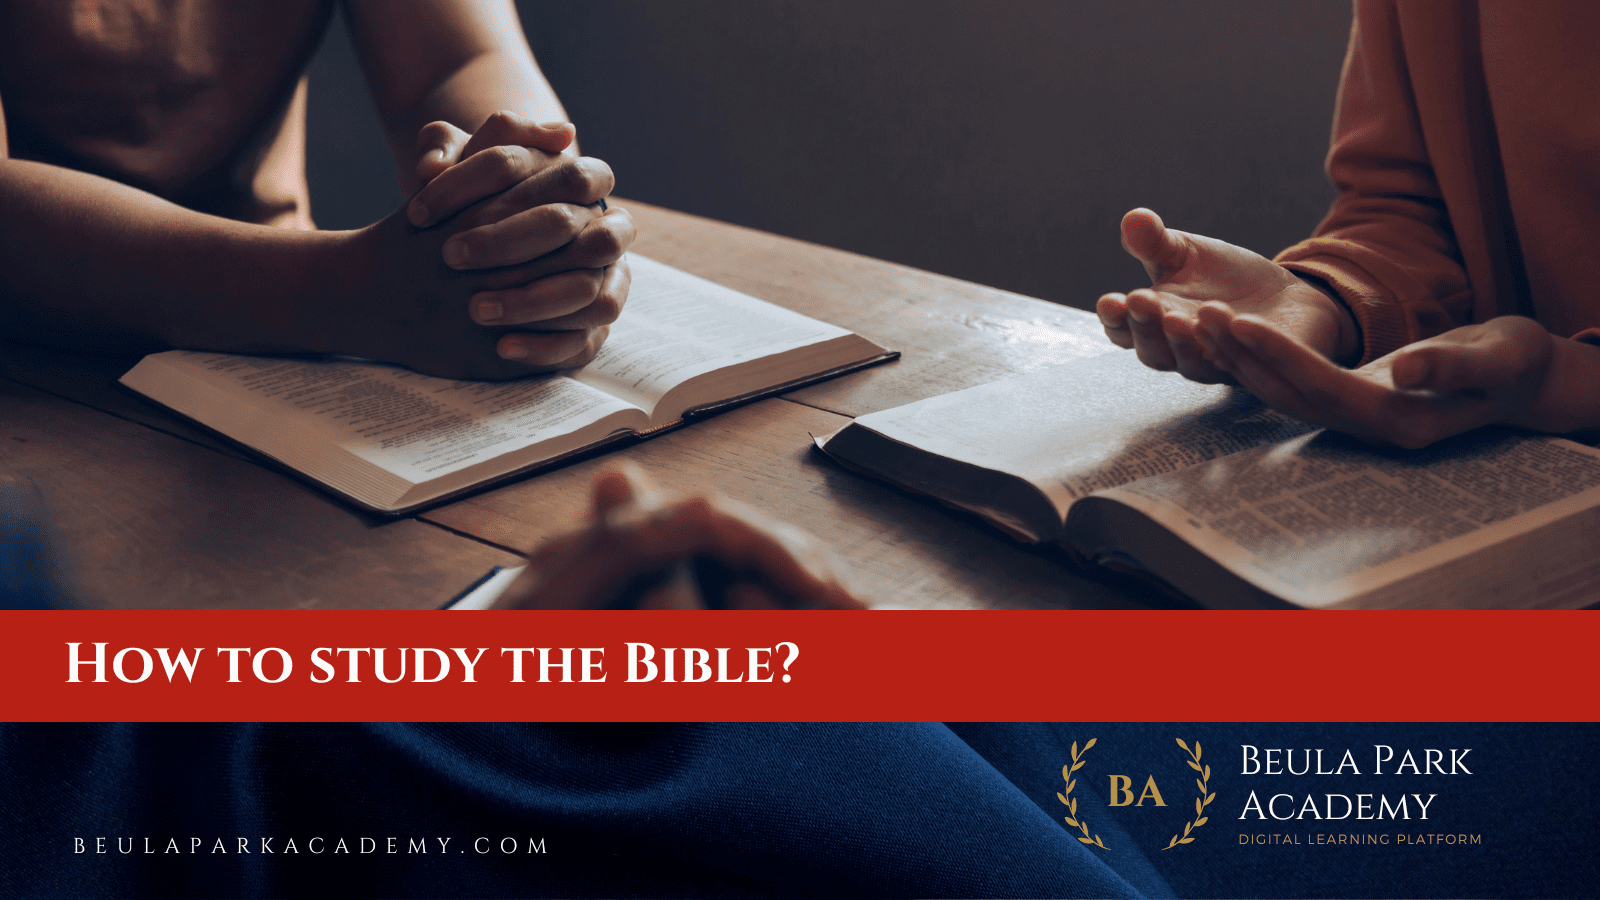 How should I study the Bible?